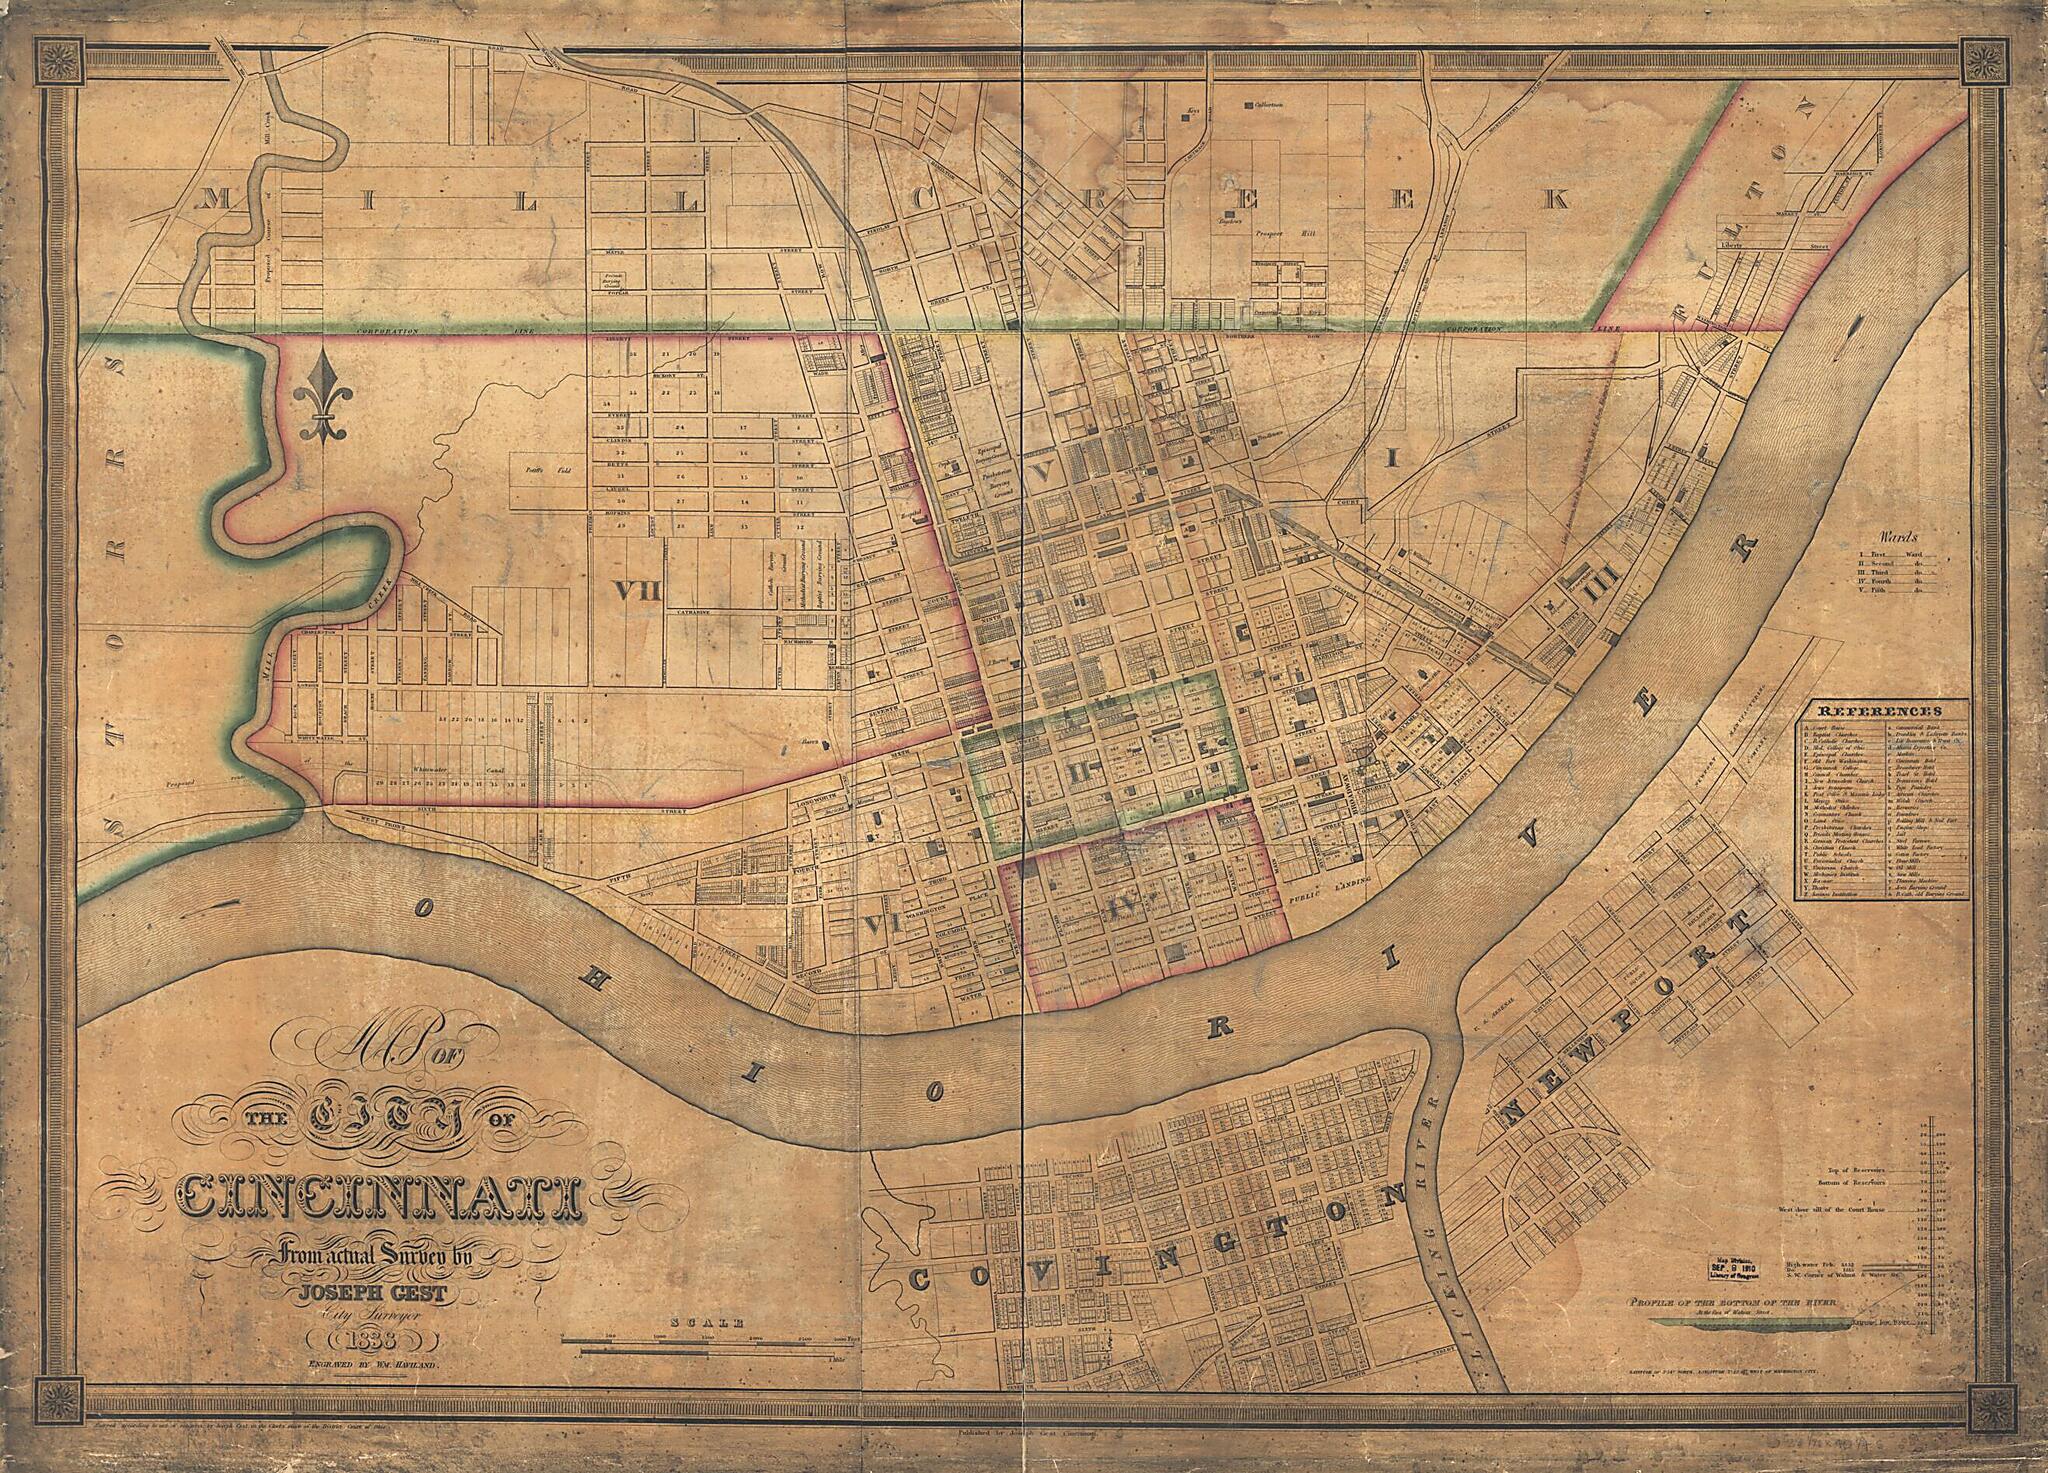 This old map of Map of the City of Cincinnati from 1838 was created by Joseph Gest, W. (William) Haviland in 1838